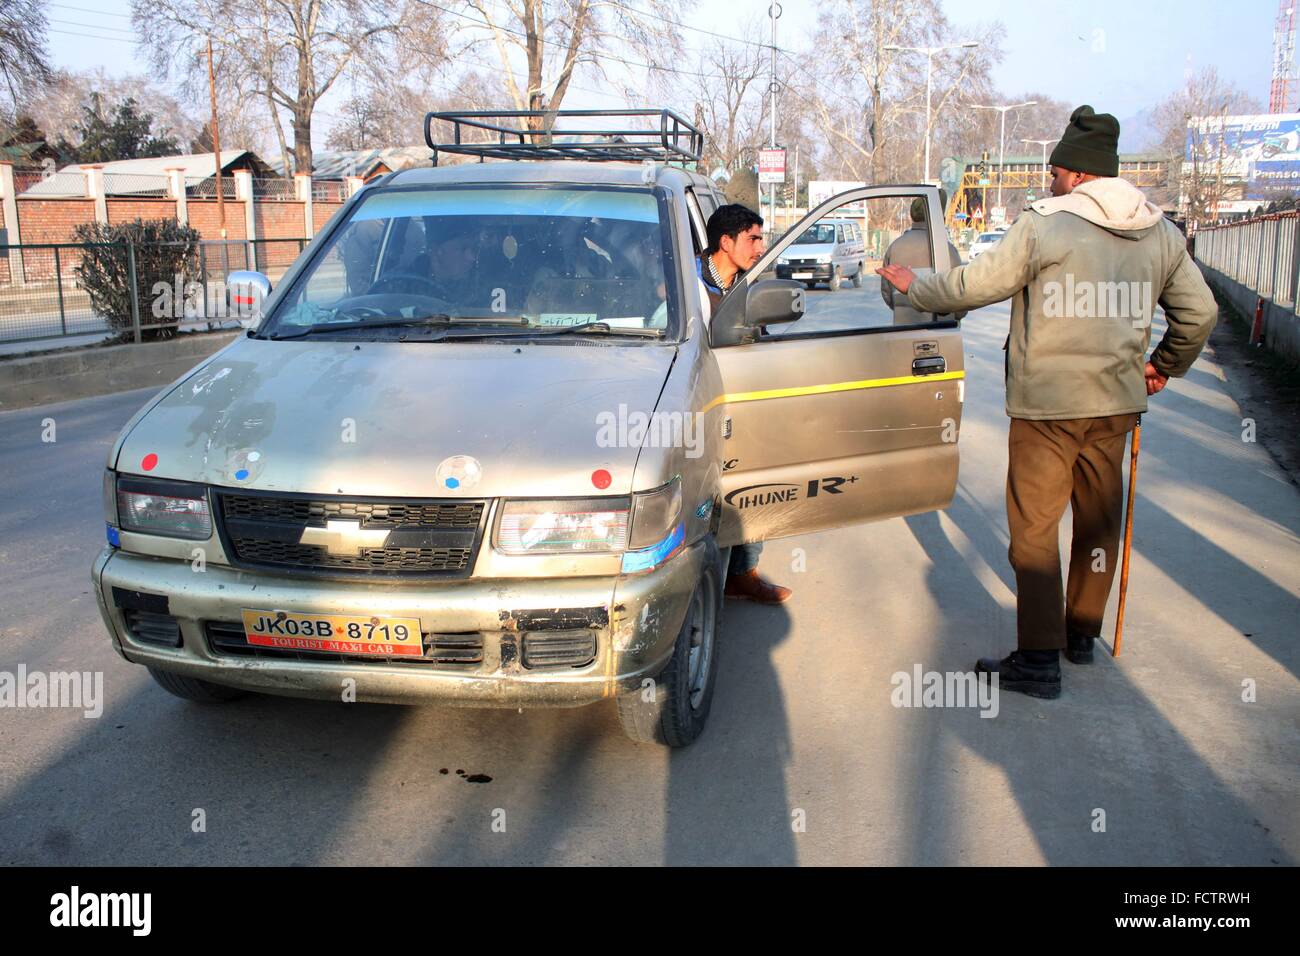 Indian police men checks a passenger  vehicle near a temporary barricade in place for surprise search operation in Srinagar, the summer capital of Indian Kashmir, 25 January 2016. Security has been beefed up in Indian Kashmir ahead of the Indian Republic Day celebrations scheduled to be held on 26 January.(Basit Zargar/ Alamy Live News) Stock Photo